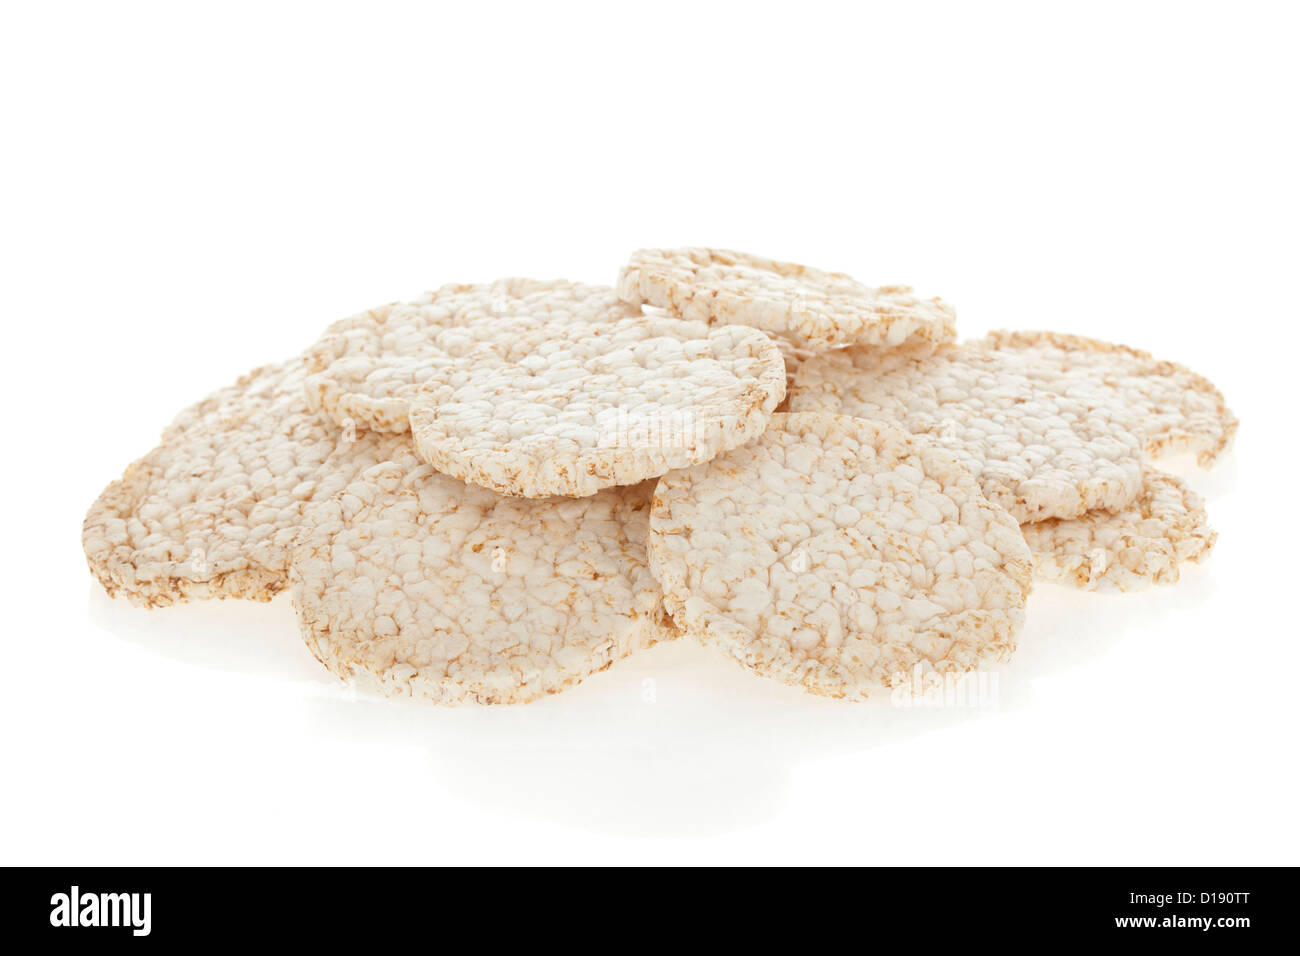 Diet rice cakes pile isolated on white background Stock Photo